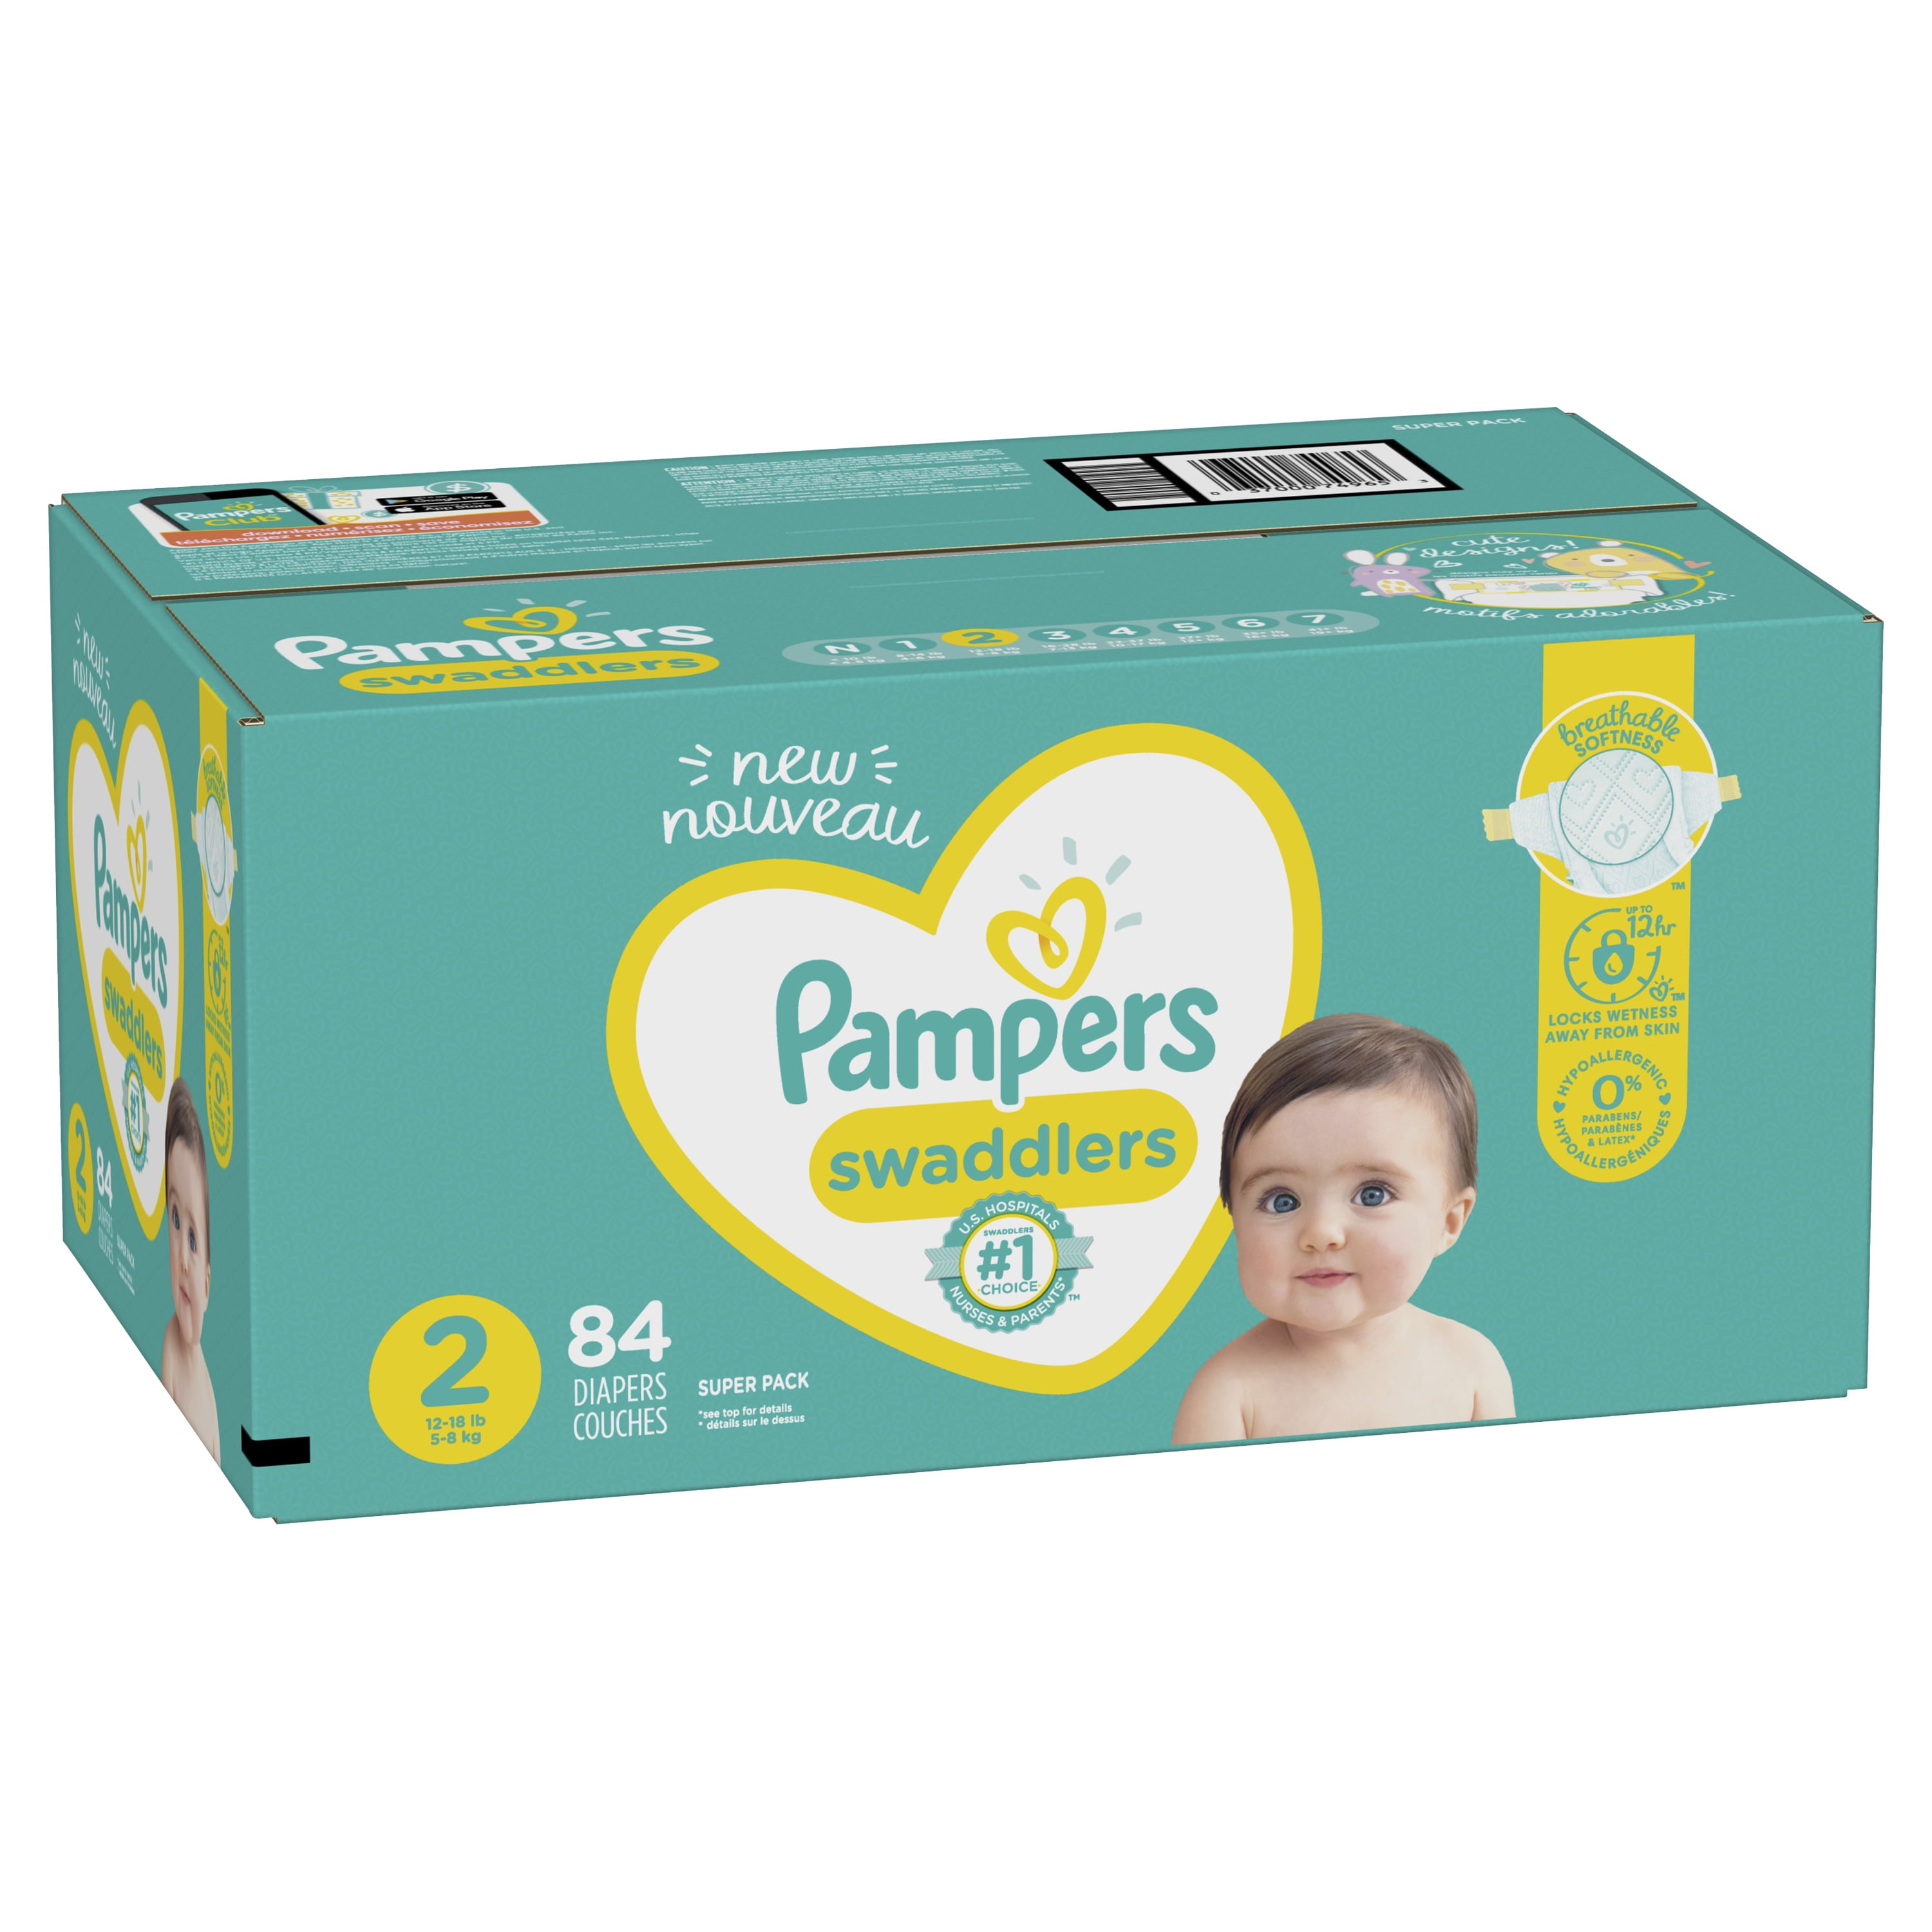 Pampers Pañales Swaddlers - Tamaño 2, 84 unidades, pañales desechables  ultra suaves para bebé